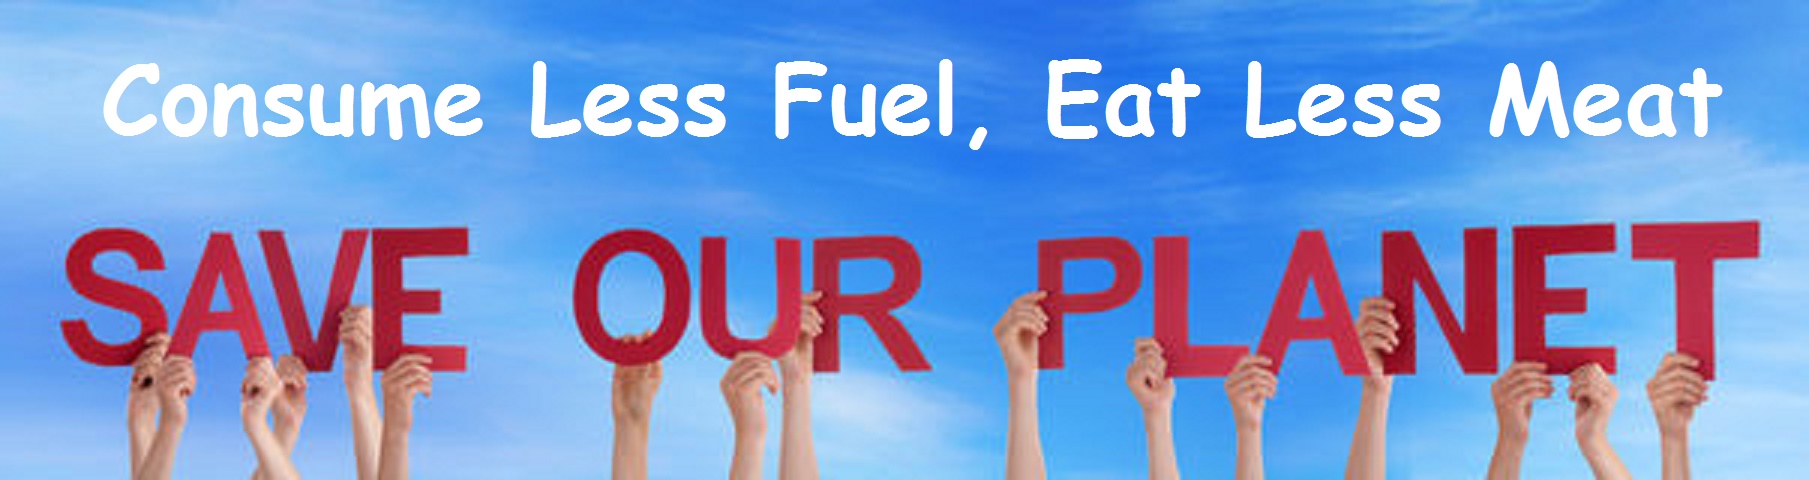 Consume Less Fuel, Eat Less Meat